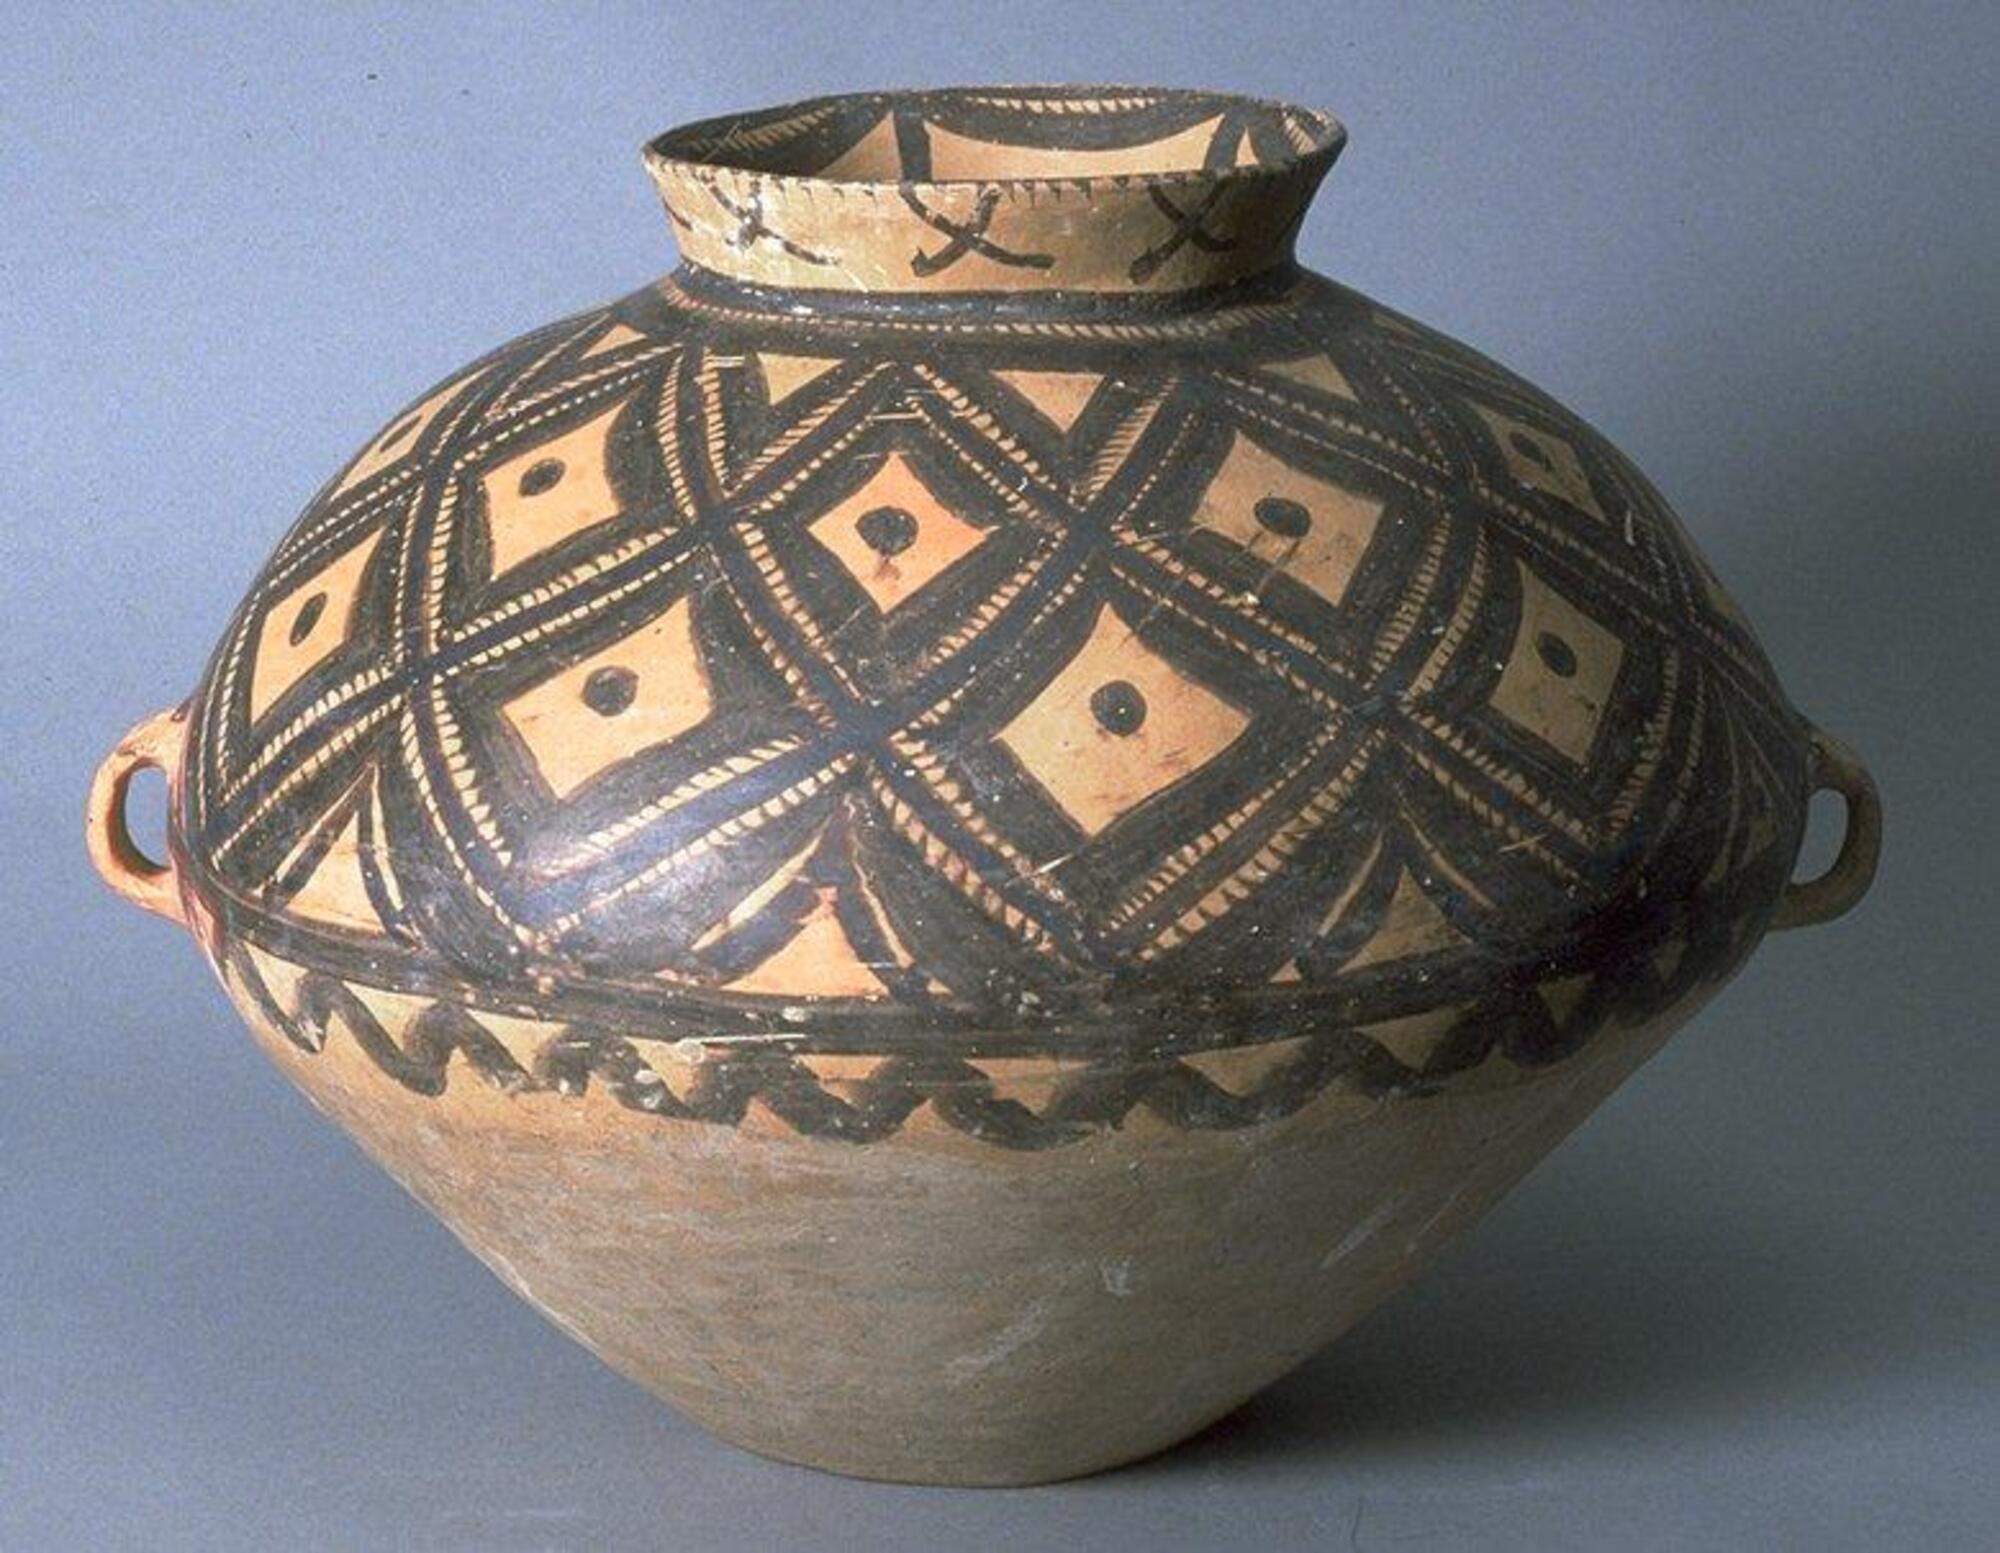 This light reddish-buff earthenware <em>guan (</em>罐) jar has a wide globular upper body and a conical lower body on a narrow flat base with a narrow neck and flaring rim. There are two diametrically opposed lug handles at the waist. Painted on the upper half of the body with black pigment are a network of rhomboid shapes, hatch-marks and dots confined within solid band borders, with a lobed line border below.  Around the neck are a painted "X" design, hatch marks and a lobed border to the interior.  